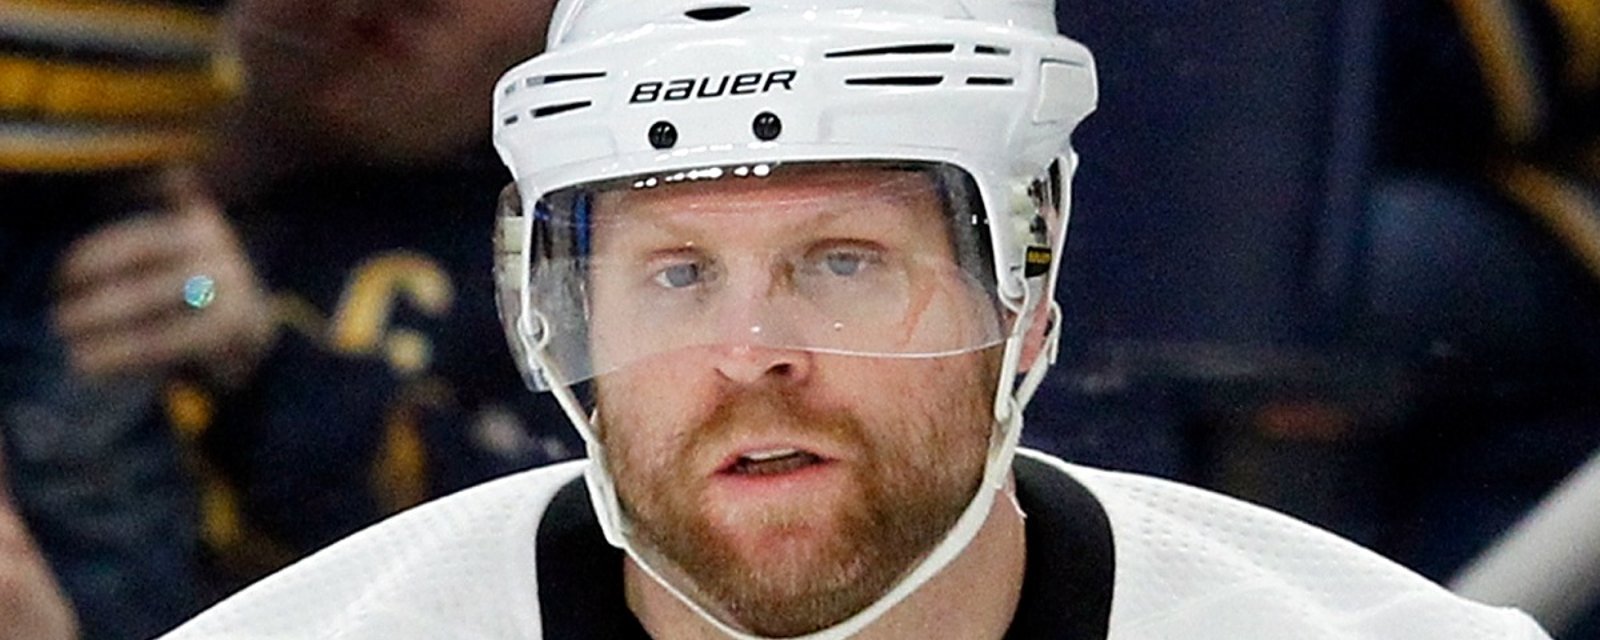 NHL insider proposes player for player trade involving Phil Kessel.